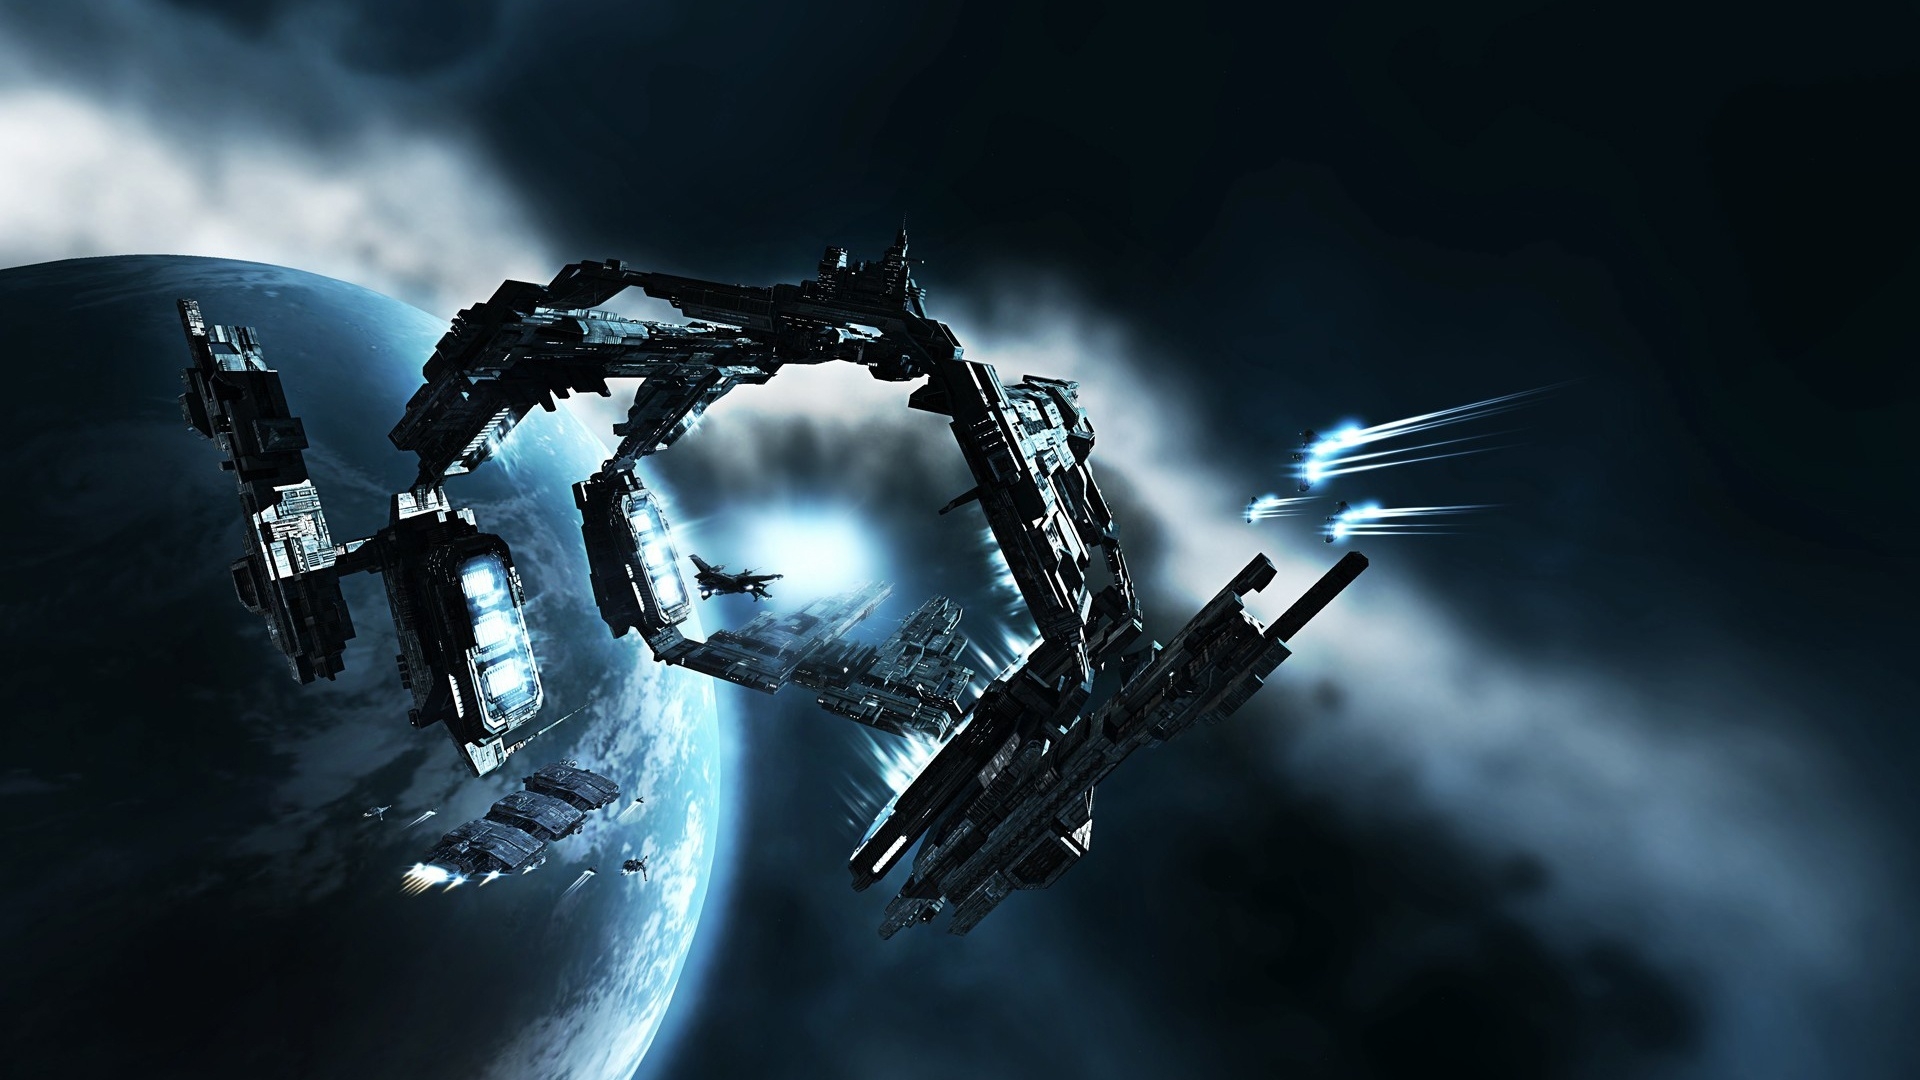 Eve Station for 1920 x 1080 HDTV 1080p resolution